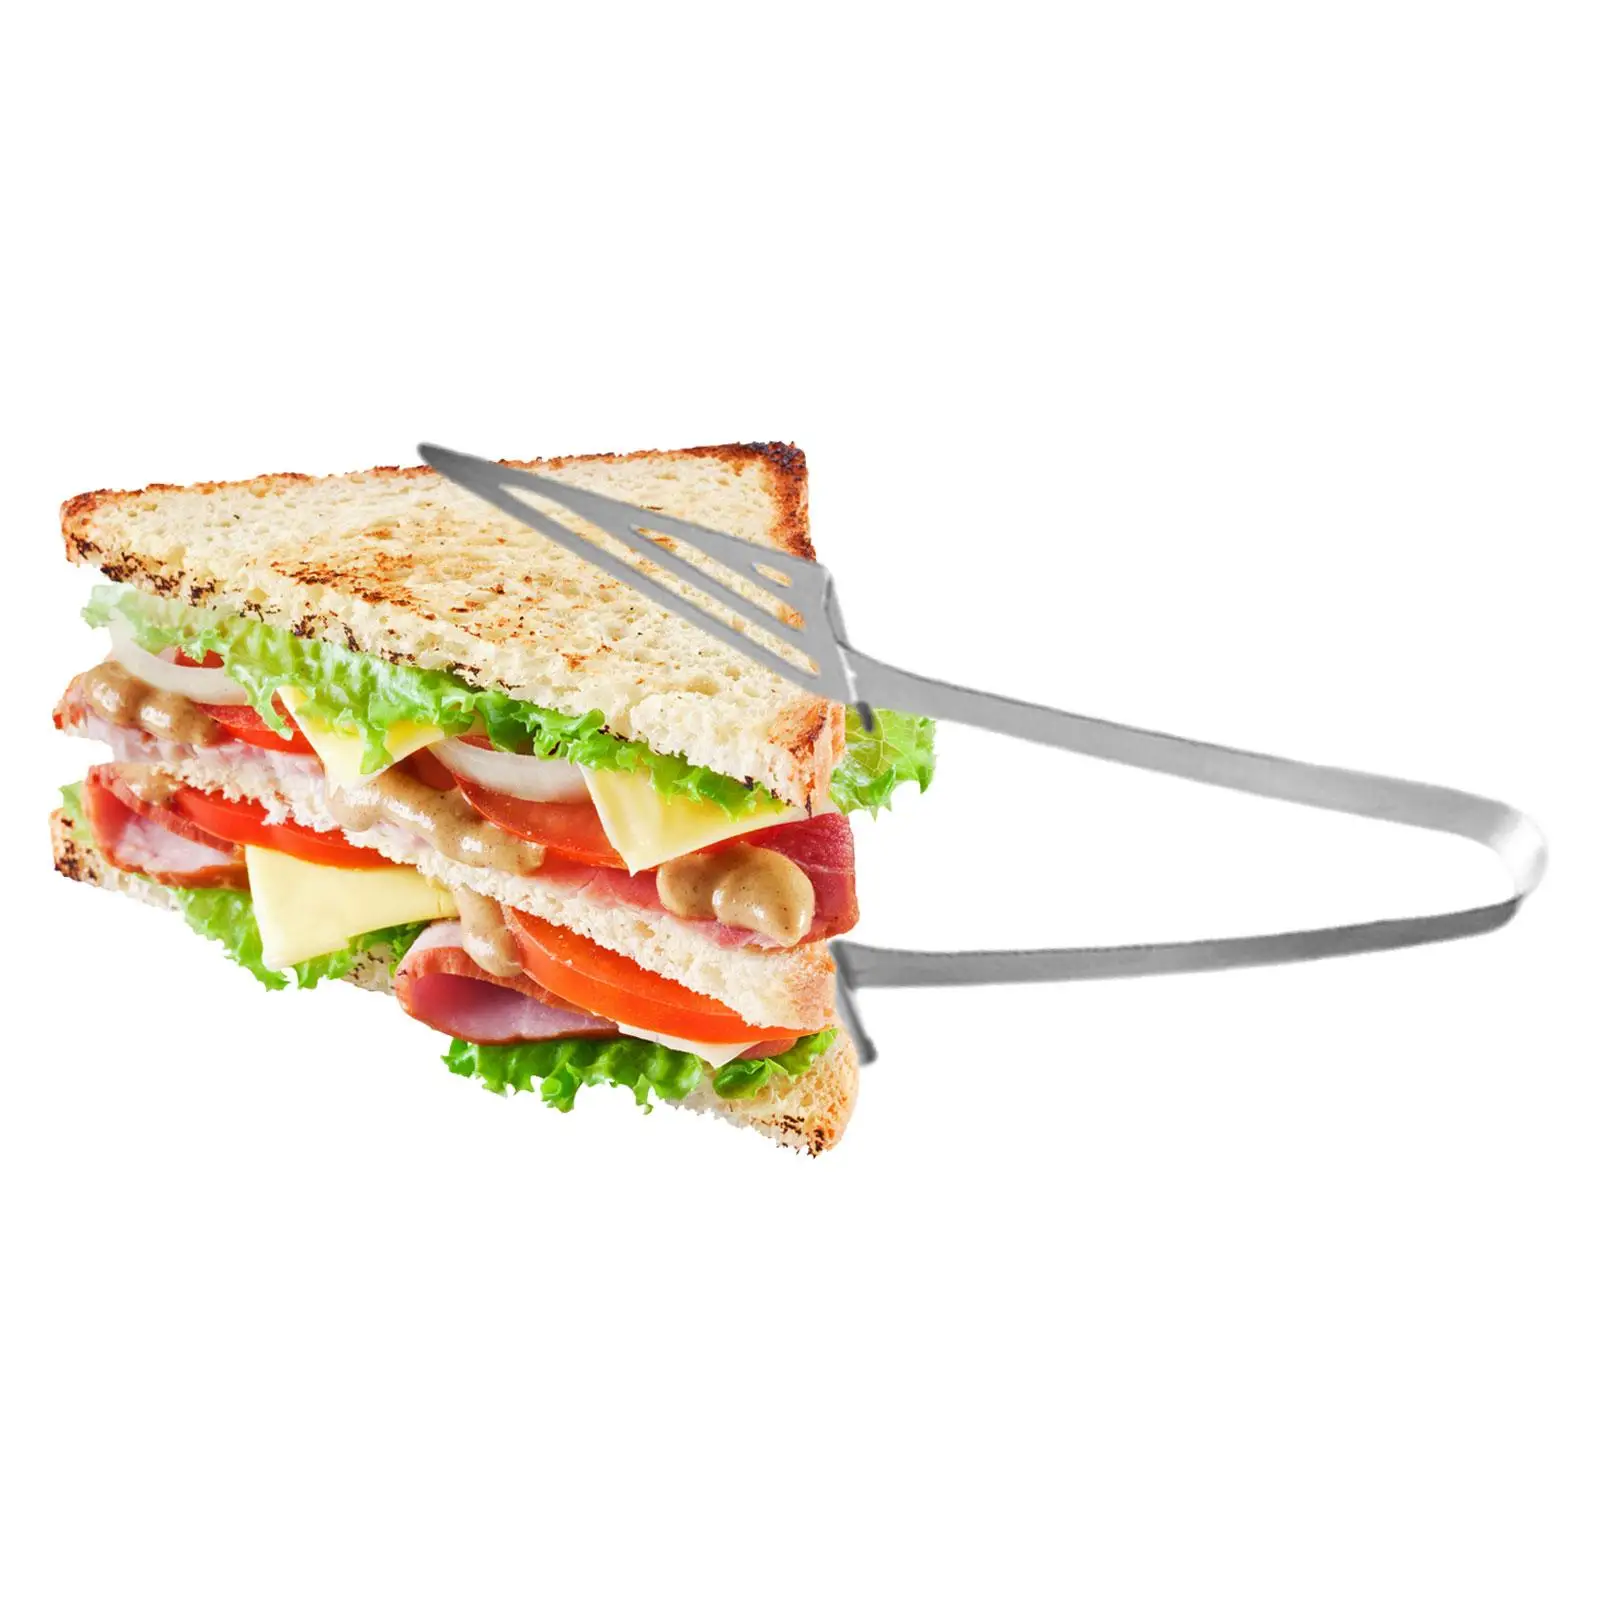 Pastry Tongs Bread Clip Food Clip Kitchen Gadgets Kitchen Tools Kitchenware Kitchen Tongs for Camping Buffet Barbecue BBQ Sweet